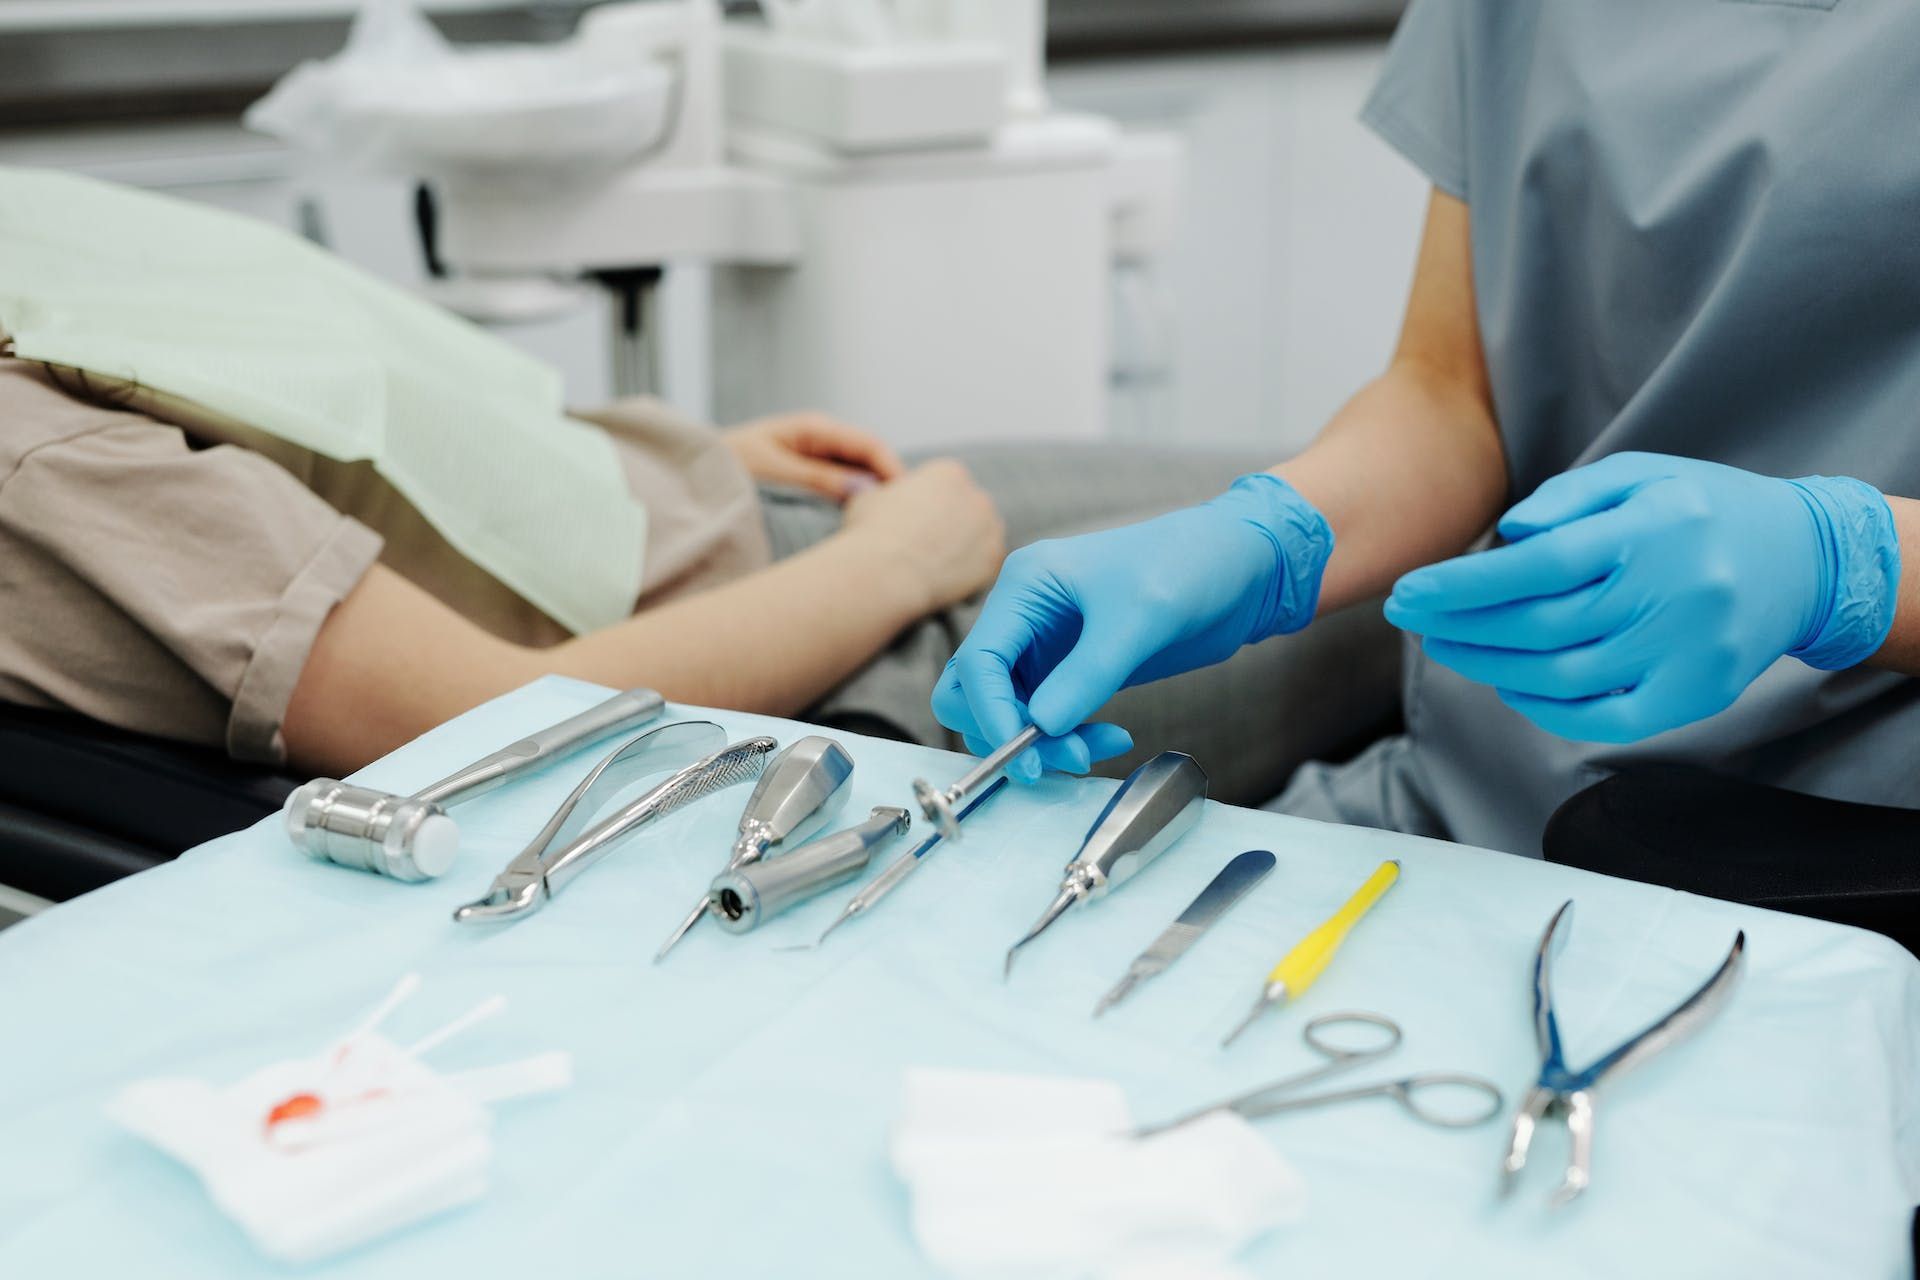 a dentist is working on a patient 's teeth while wearing blue gloves